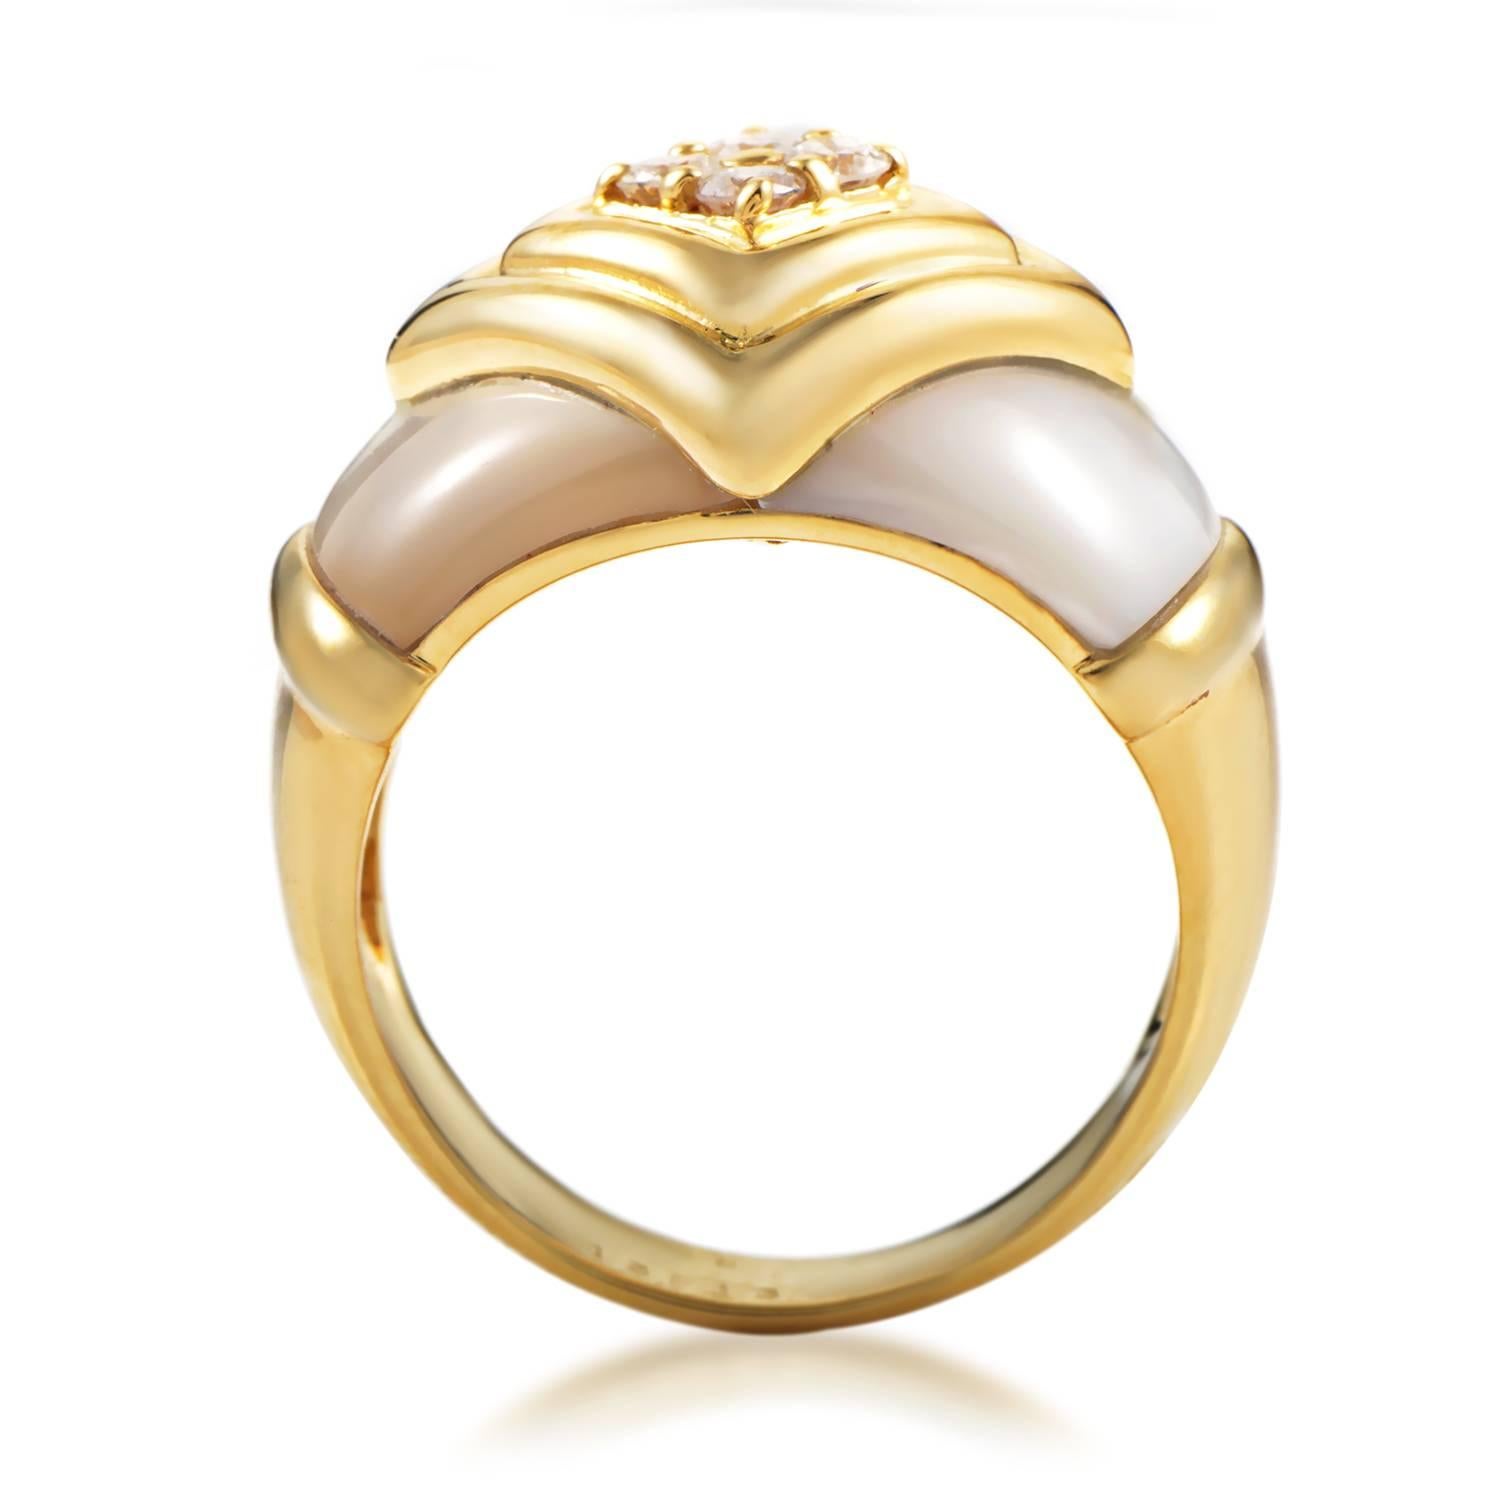 This band ring from Van Cleef & Arpels exudes prestige and class. The ring is made of 18K yellow gold and is accented with mother of pearl and four diamonds, weighing in total .20cttw.
Ring Size: 6.25 (52 1/8)
Ring Top Dimensions: 20 x 15mm
Band